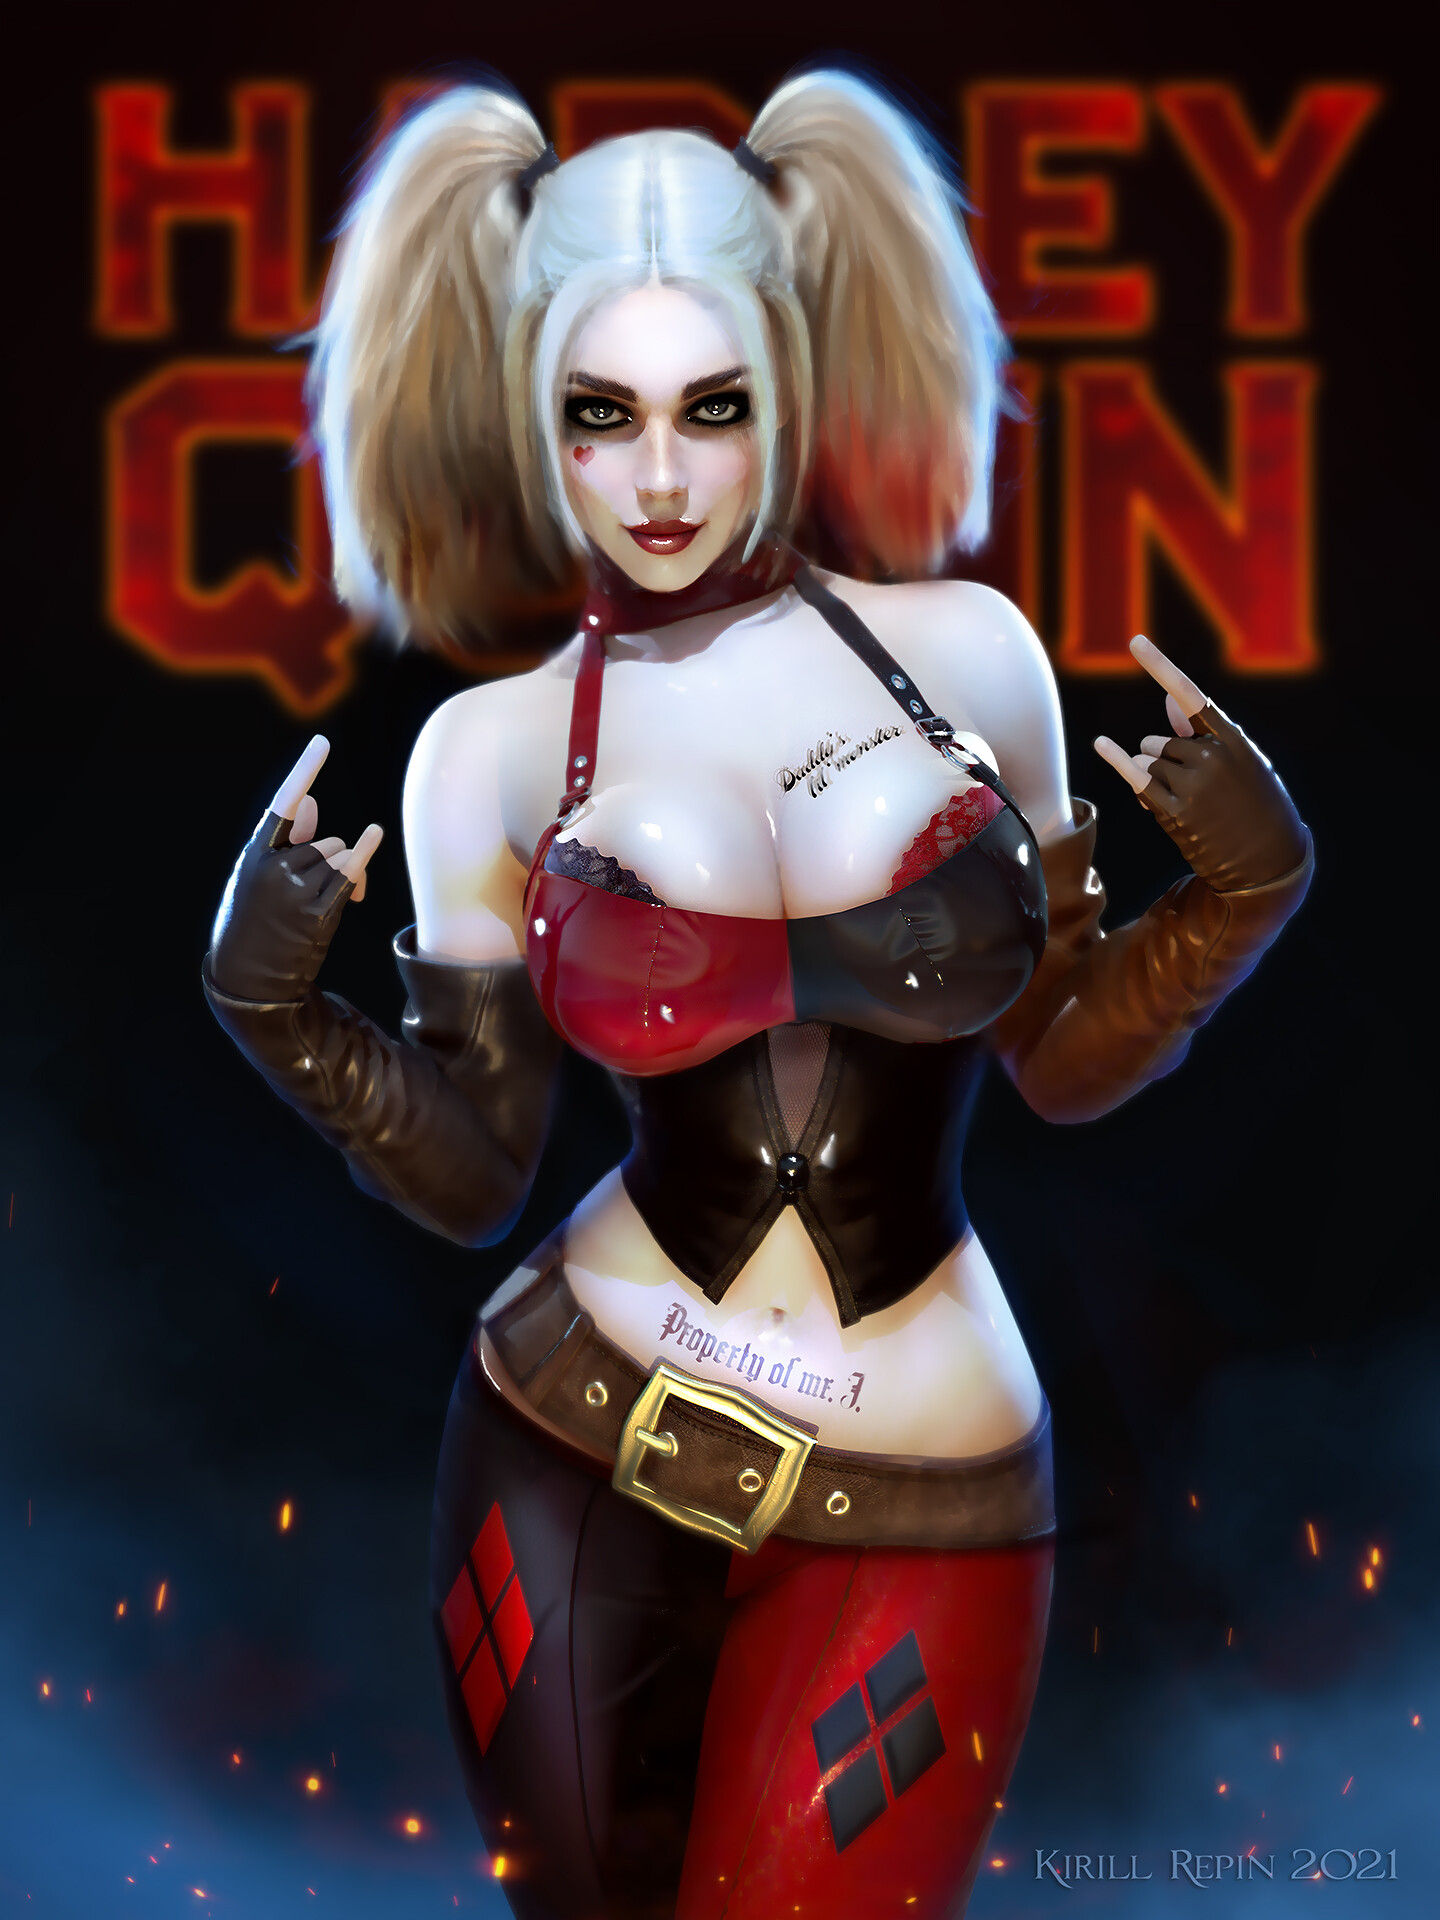 General 1440x1920 Kirill Repin drawing DC Comics Harley Quinn blonde twintails women face paint bra cleavage black clothing red clothing tattoo sparks big boobs